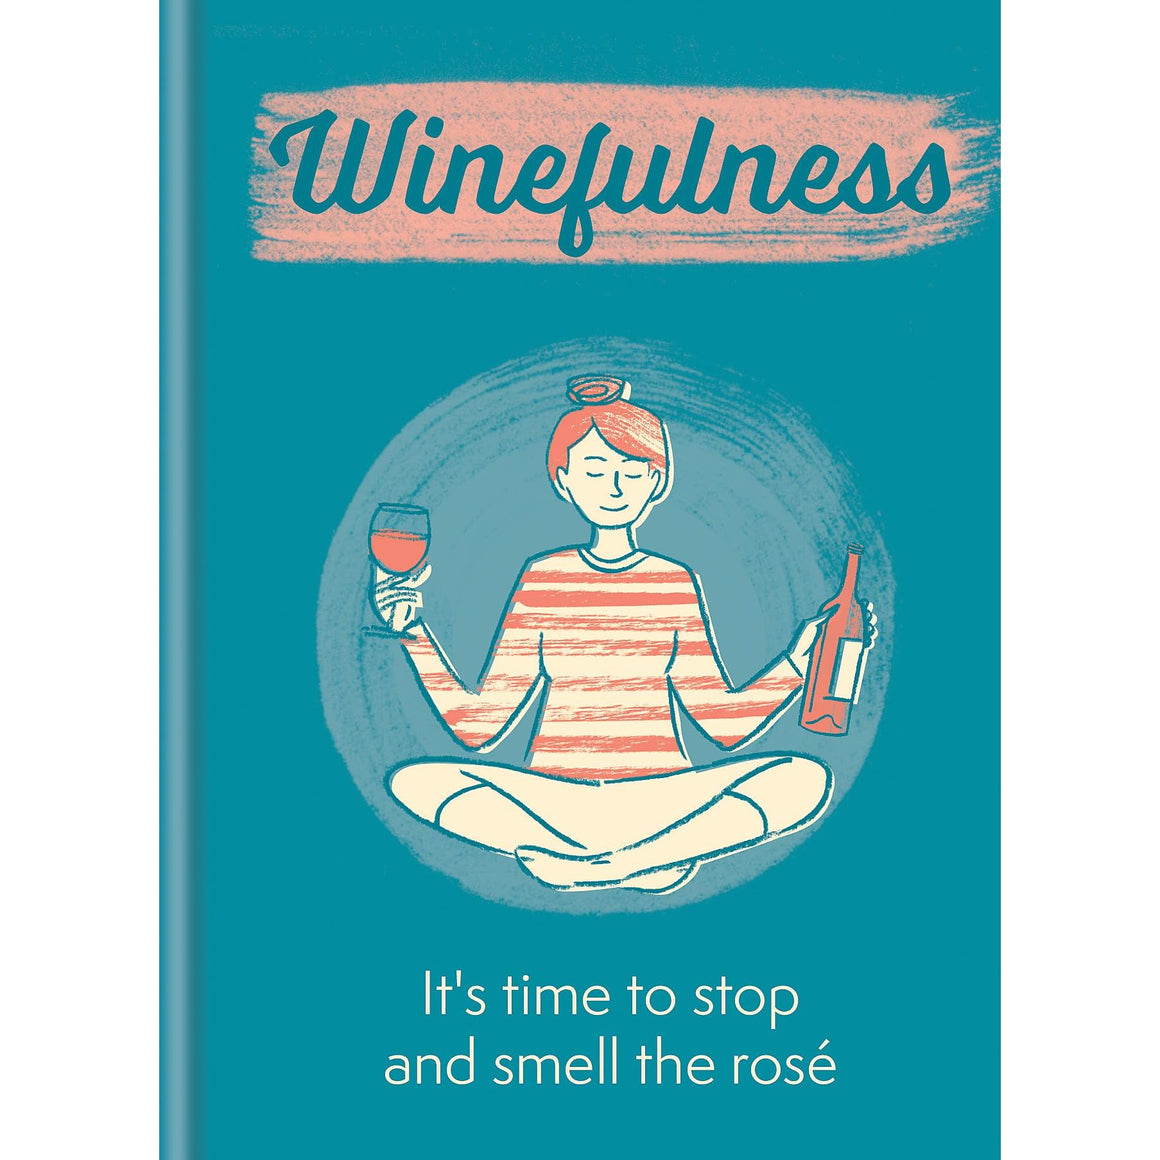 Winefulness: It's Time to Stop and Smell the Rosé